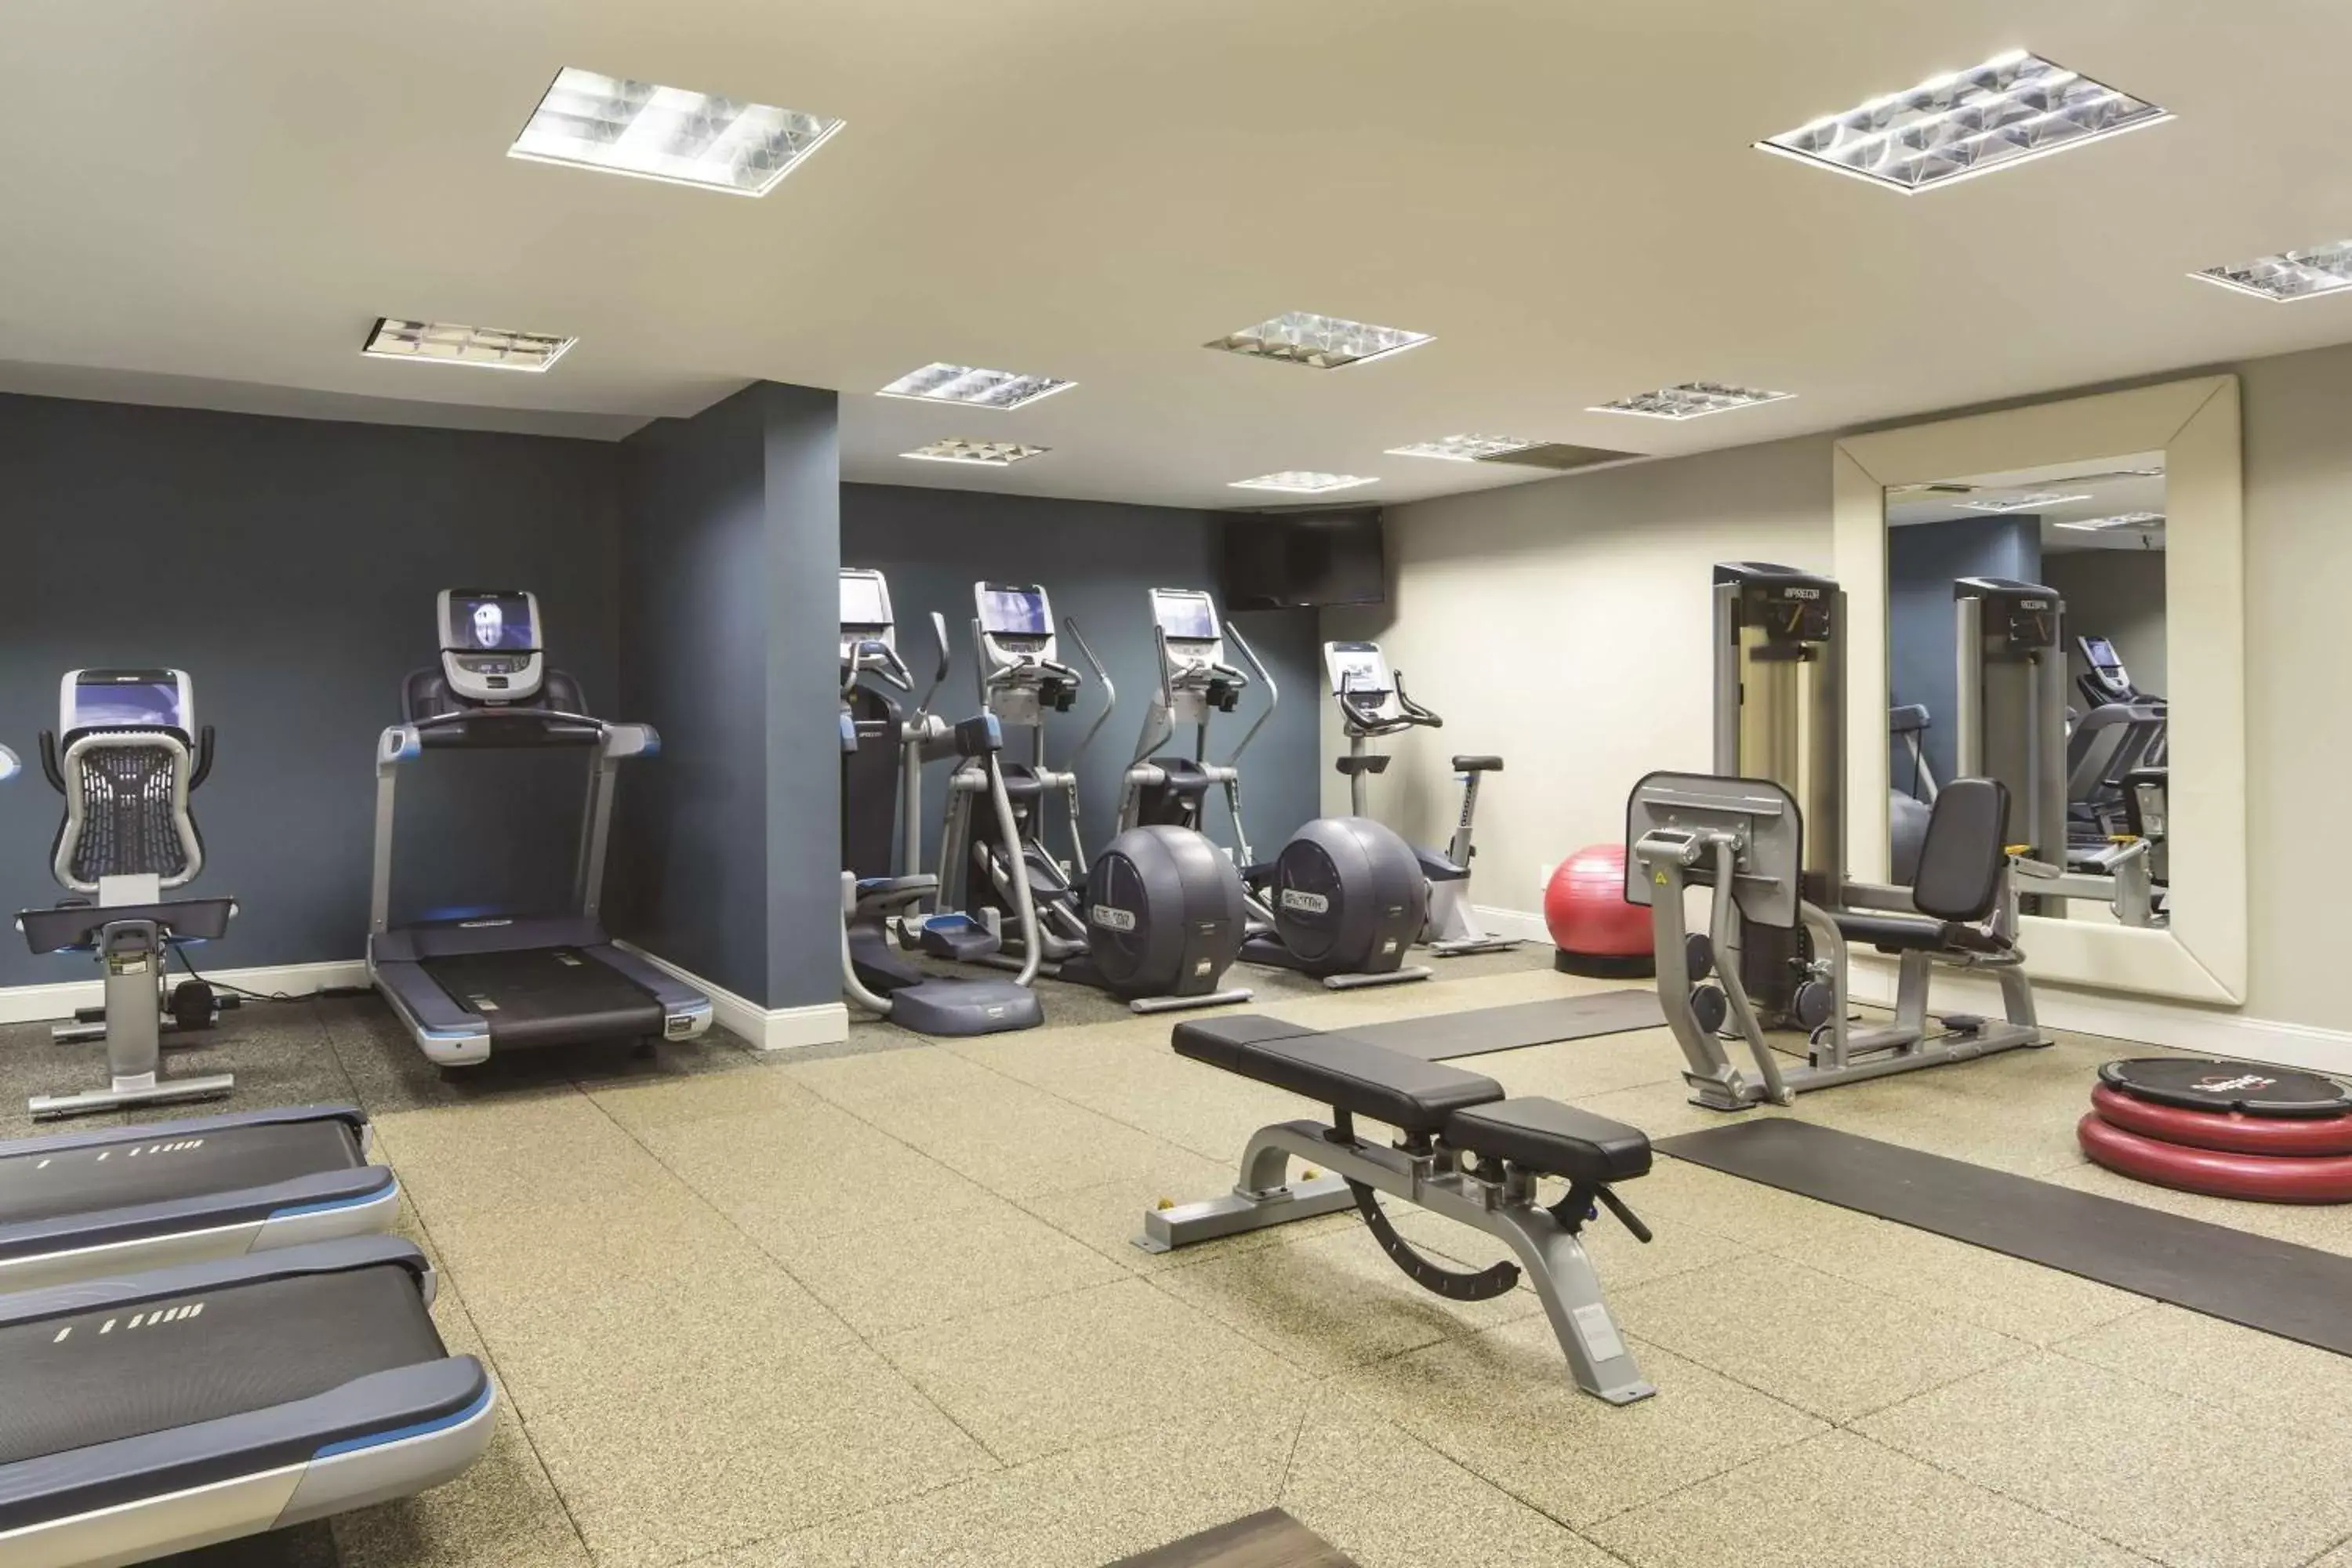 Fitness centre/facilities, Fitness Center/Facilities in Doubletree by Hilton Laurel, MD